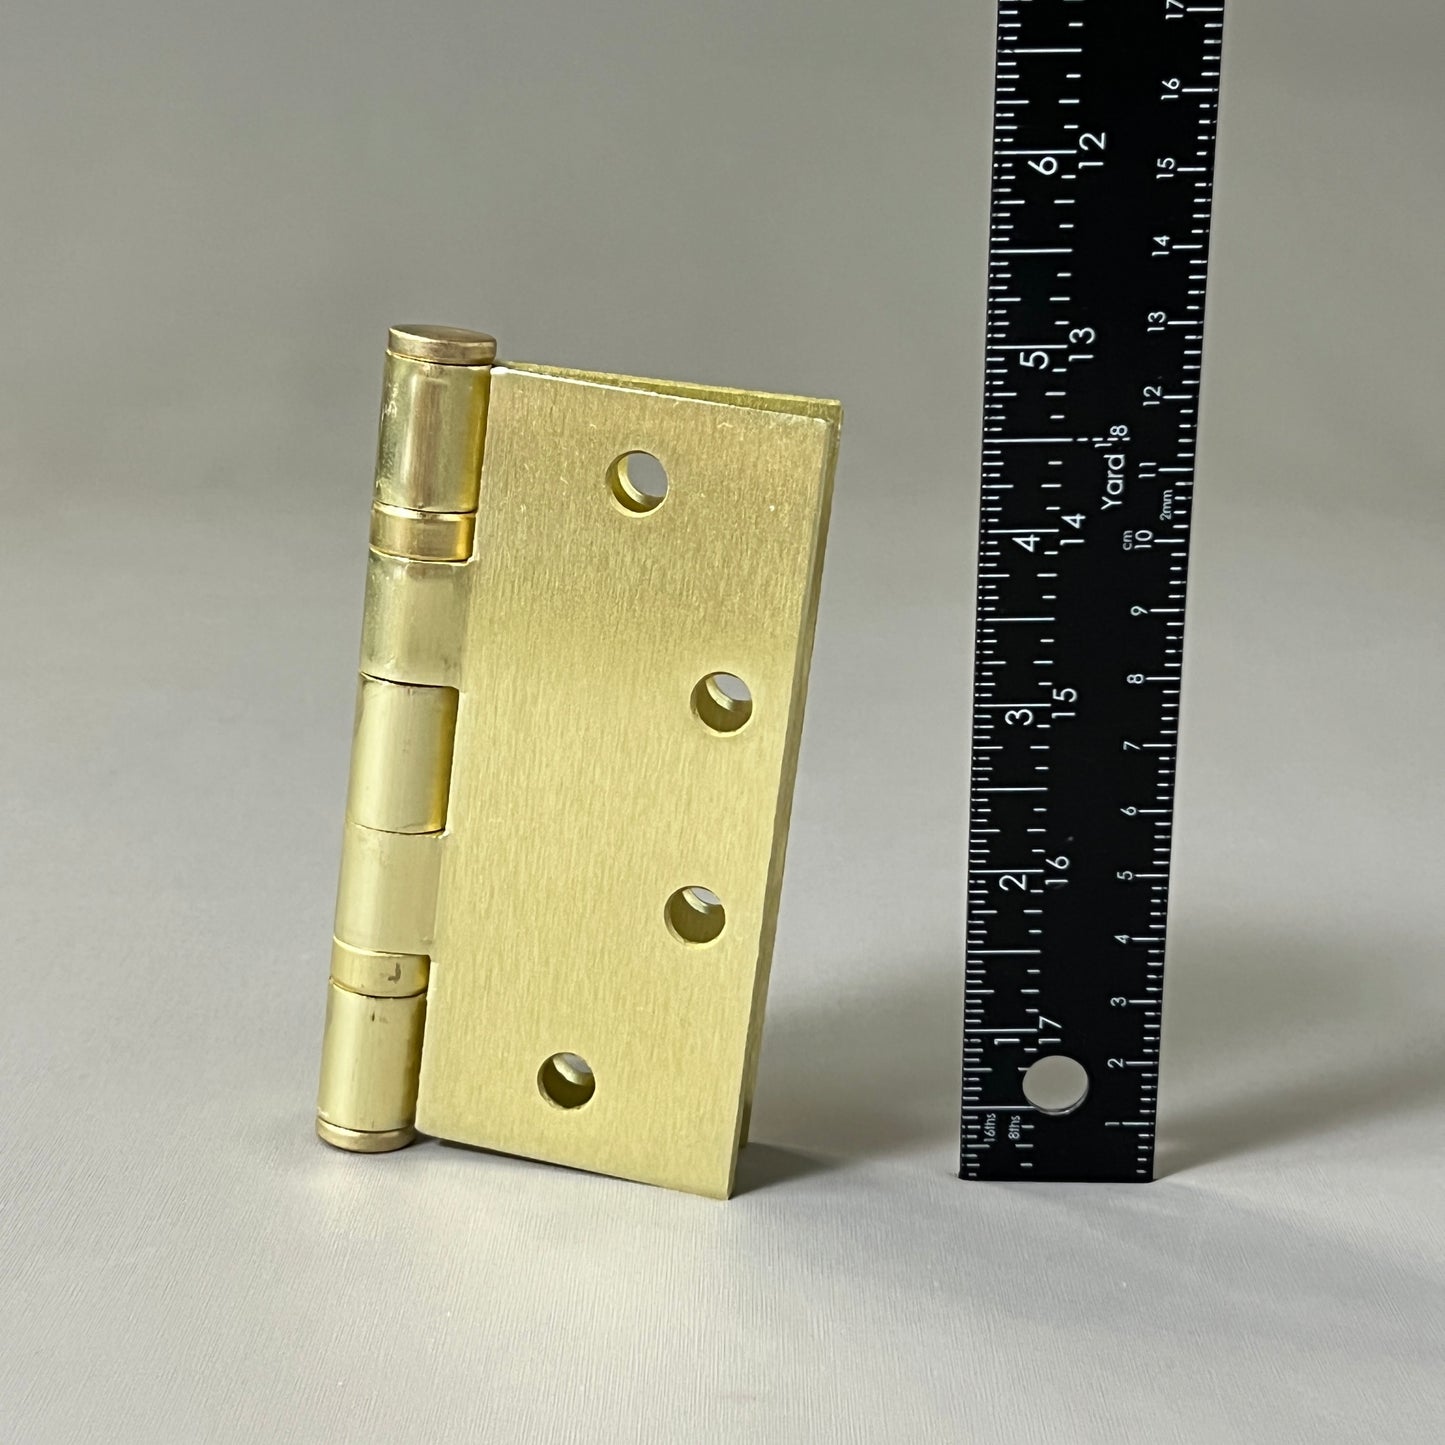 SGS Heavy Duty Commercial Grade Hinge 3-PACK 4.5" x 4.5" Satin Brass BB1000 (new)